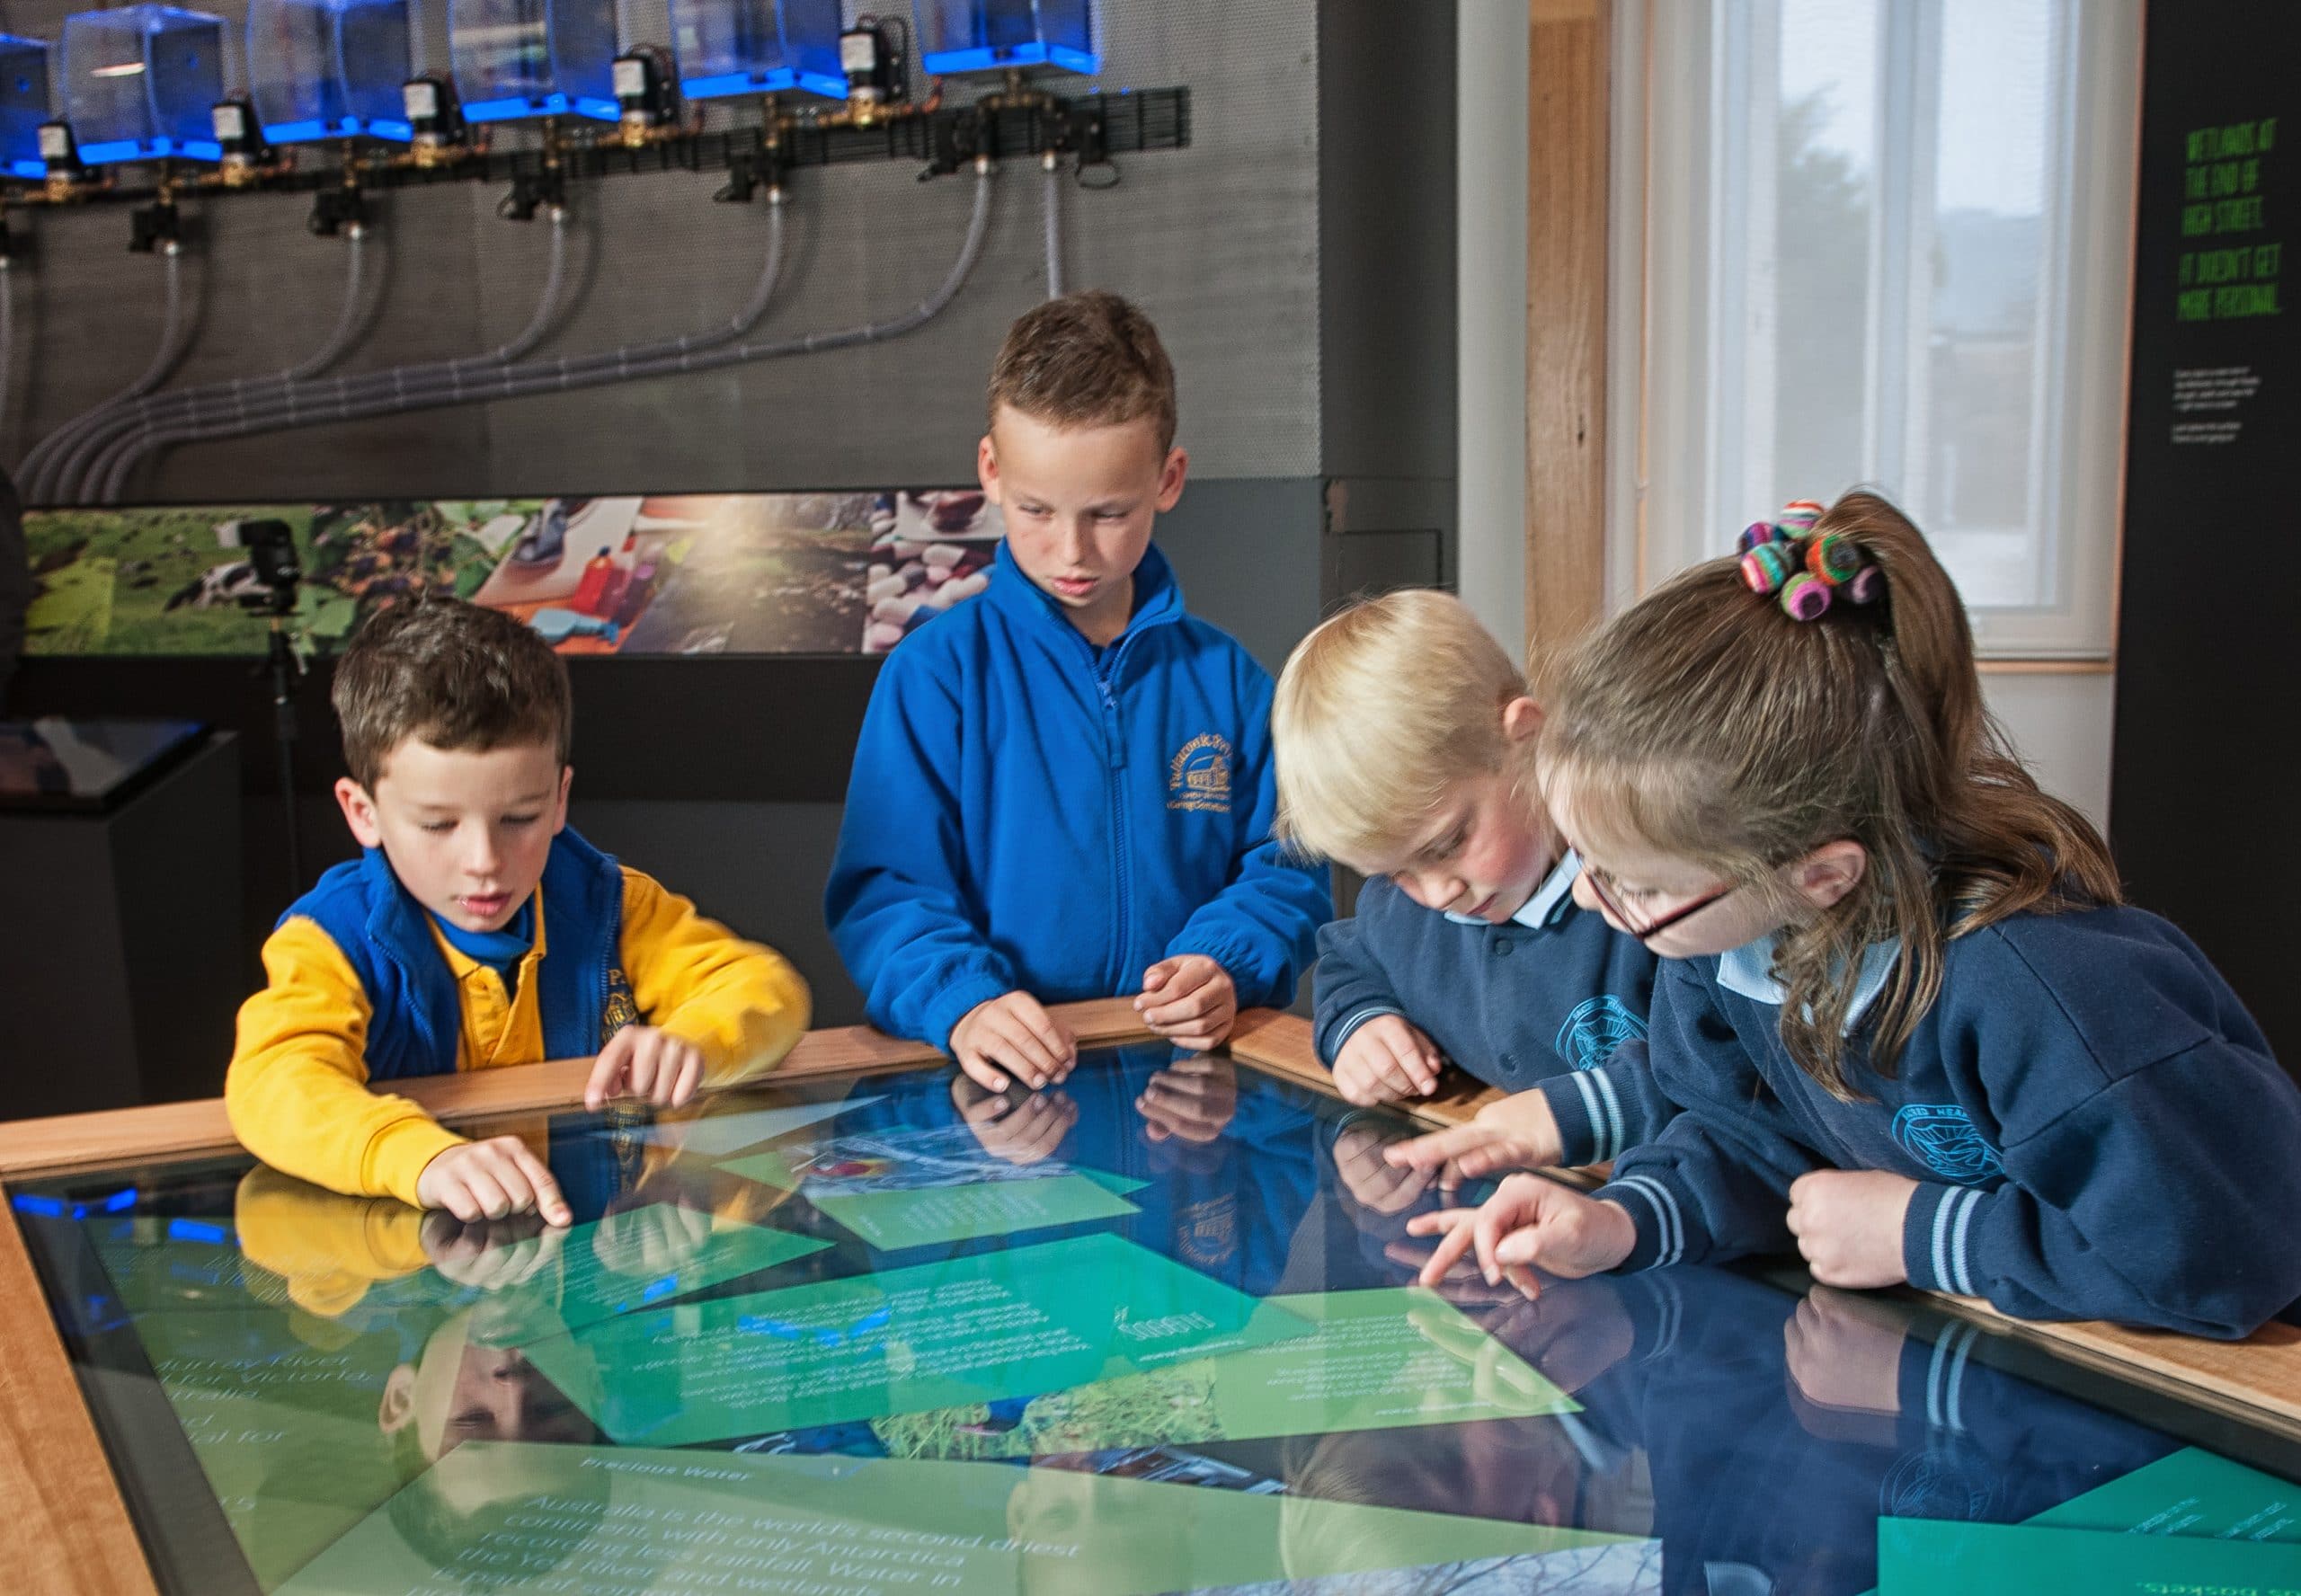 Y Water Discovery Centre